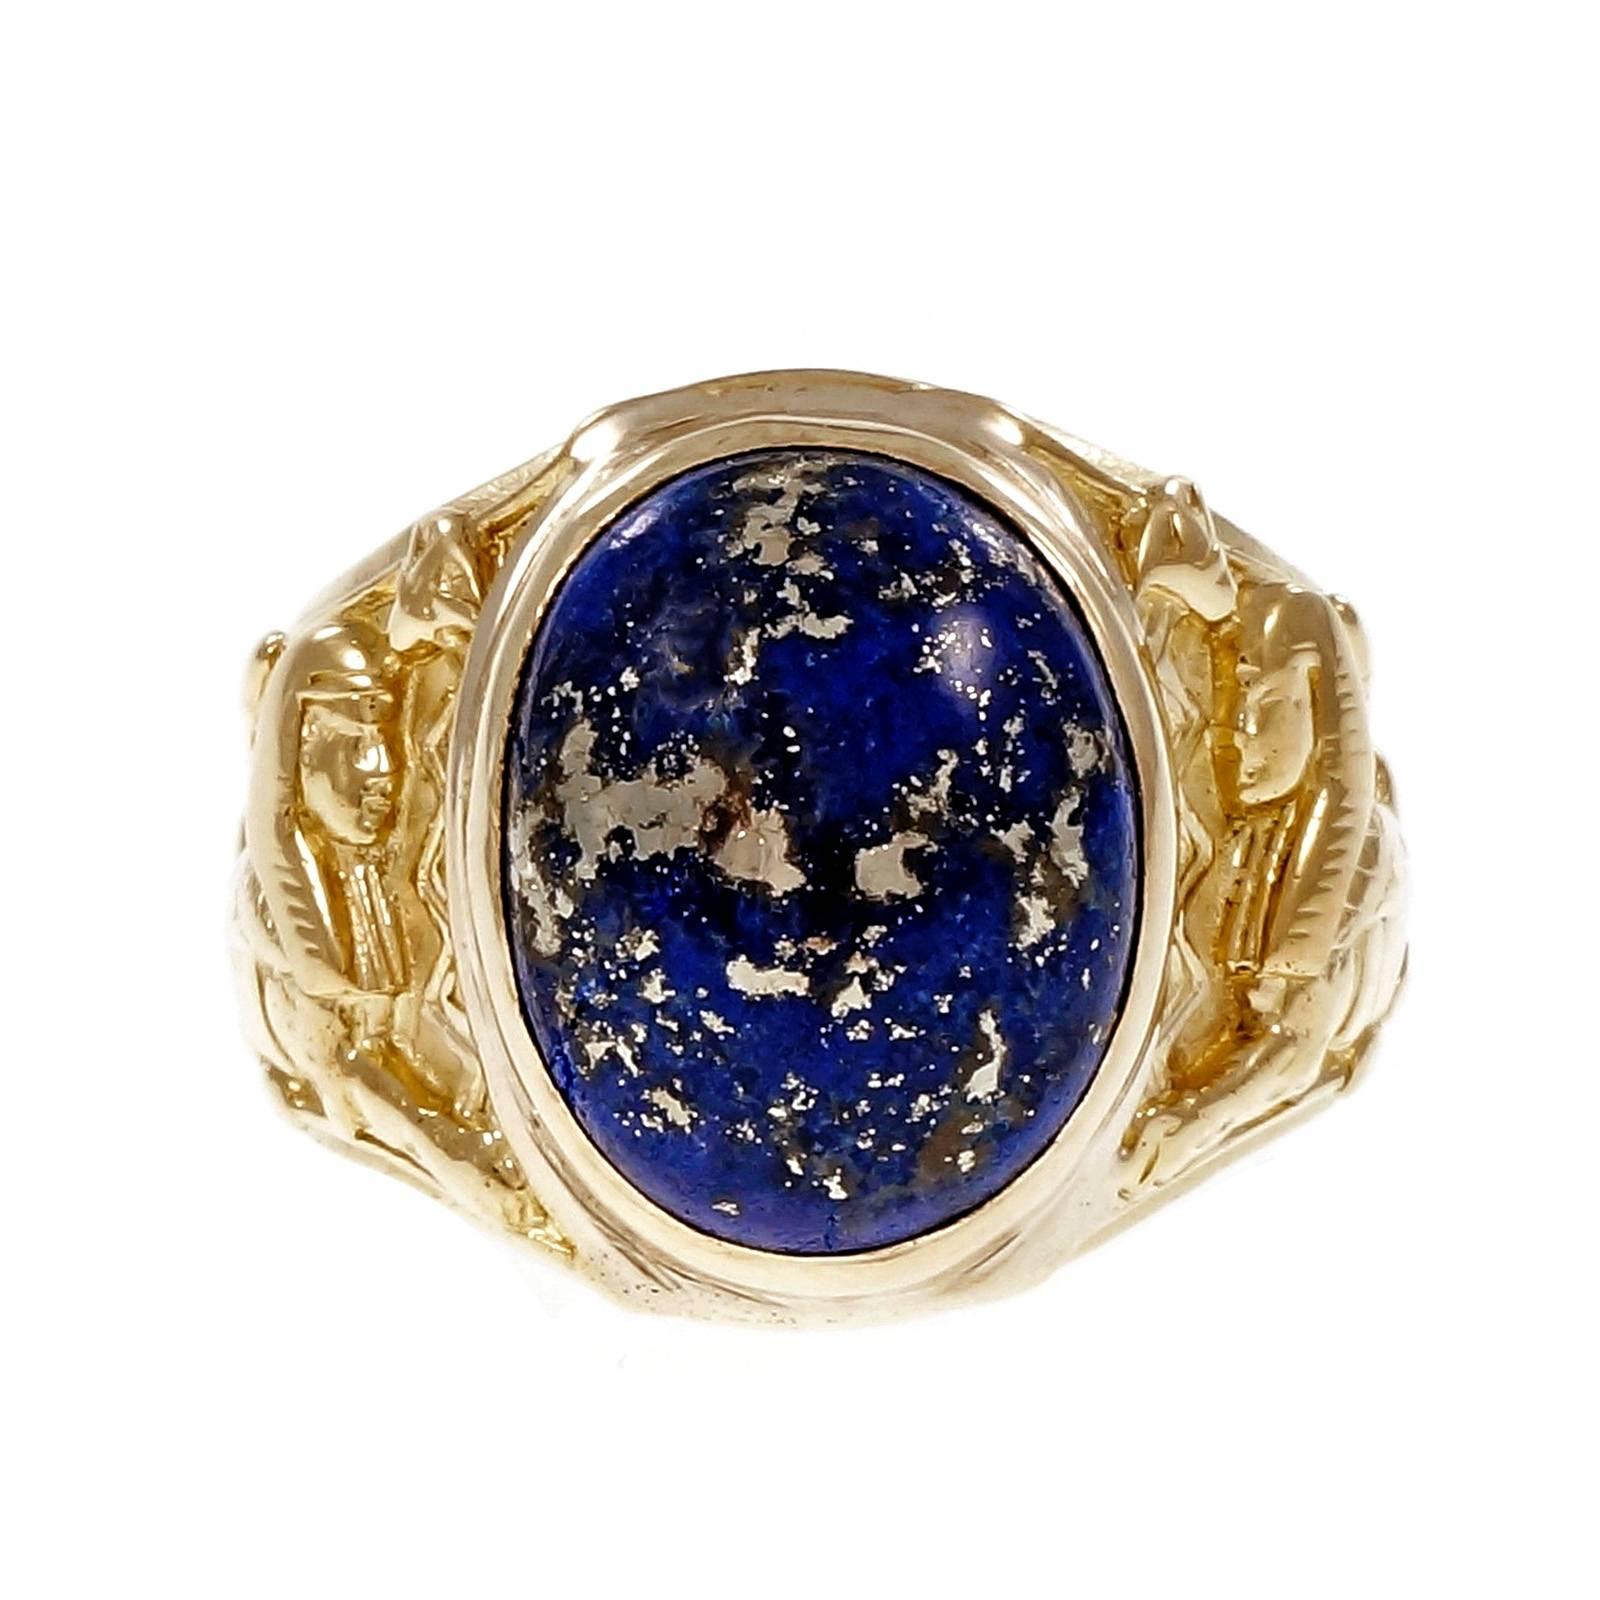 Egyptian Revival heavy solid 18k yellow gold ring with a blue GIA certified natural Lapis with Iron Pyrite flecks. 14k yellow gold bezel. Circa 1920-1929.

1 oval cabochon Lapis, 14.27 x 11.28 x 7.13mm, GIA certificate #2175709264
18k yellow